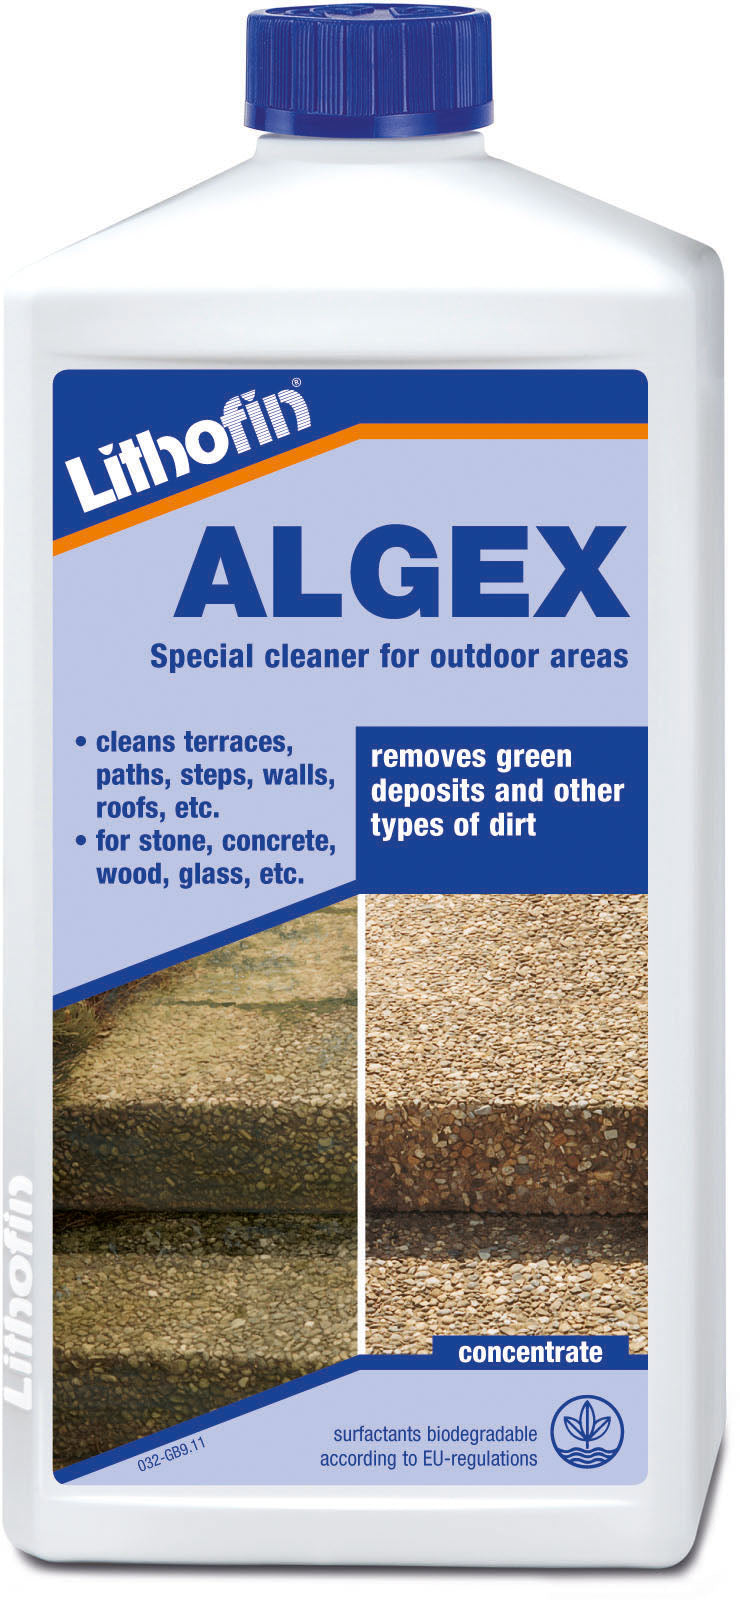 ALGEX special cleaner for outdoor areas 